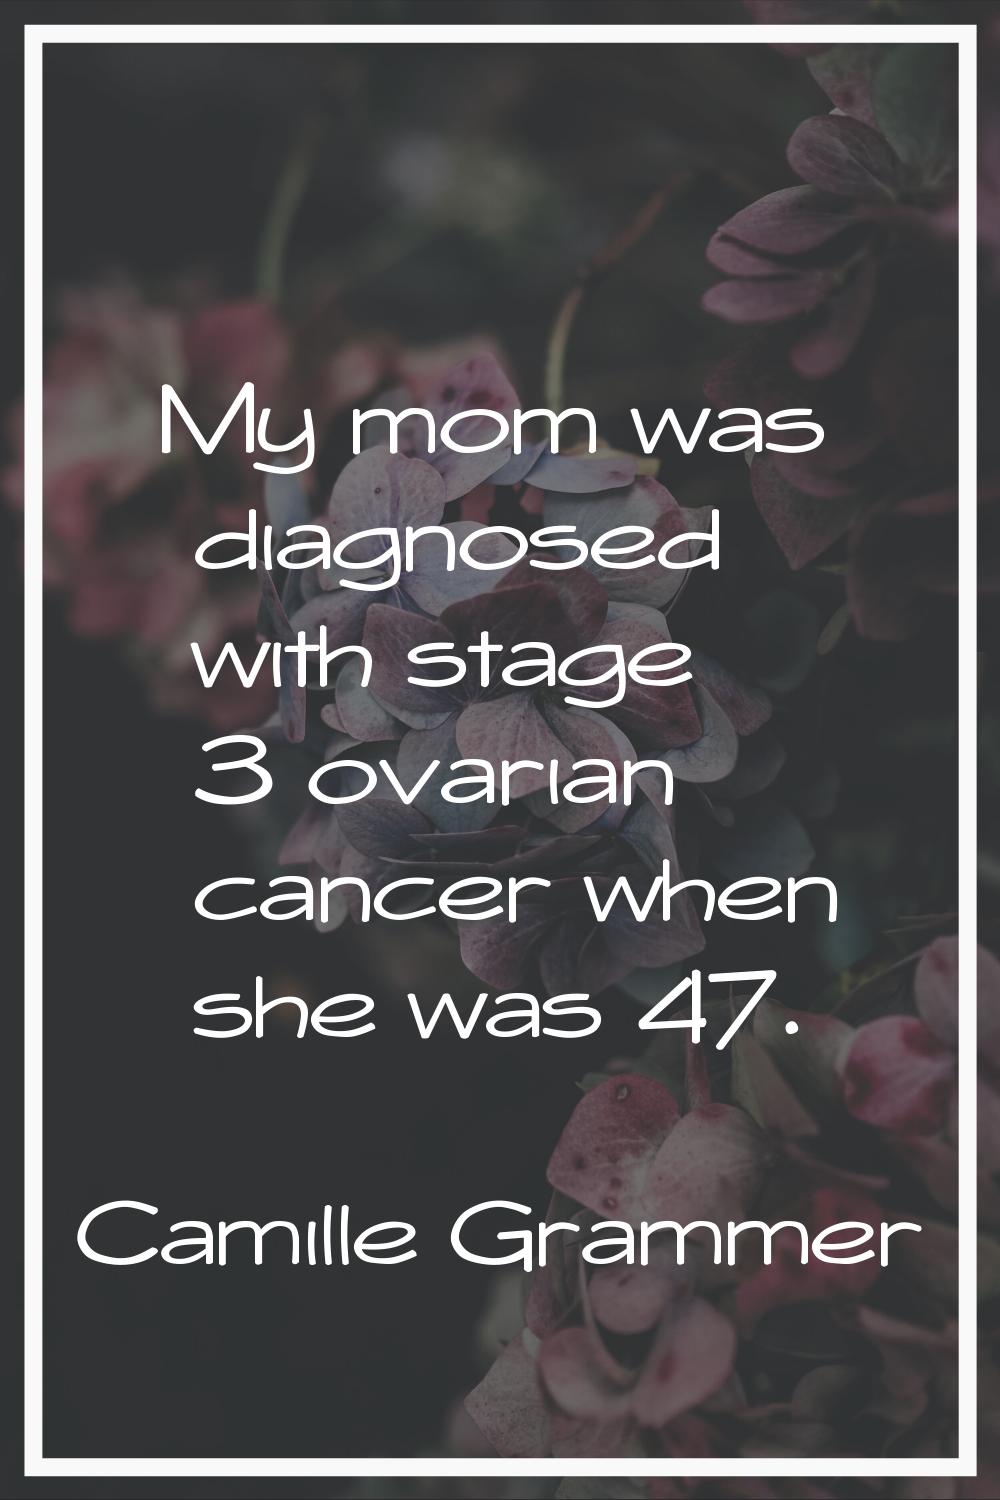 My mom was diagnosed with stage 3 ovarian cancer when she was 47.